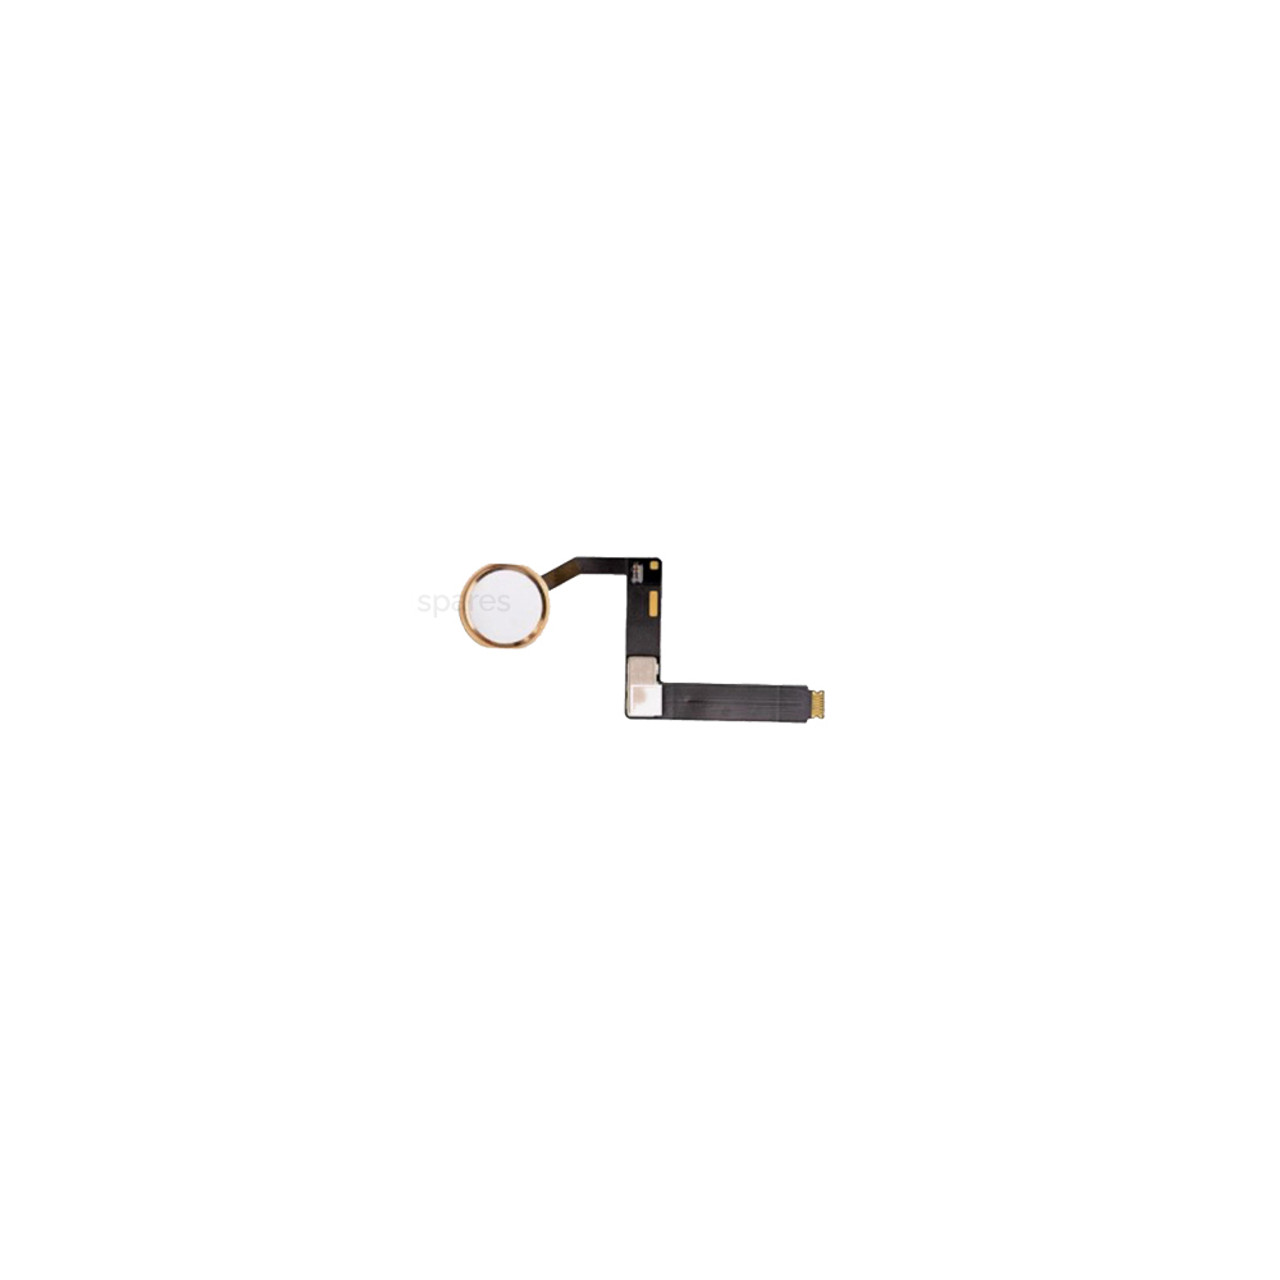 iPad Pro 9.7-inch - Home Button Flex With Rubber Seal Replacement - Gold